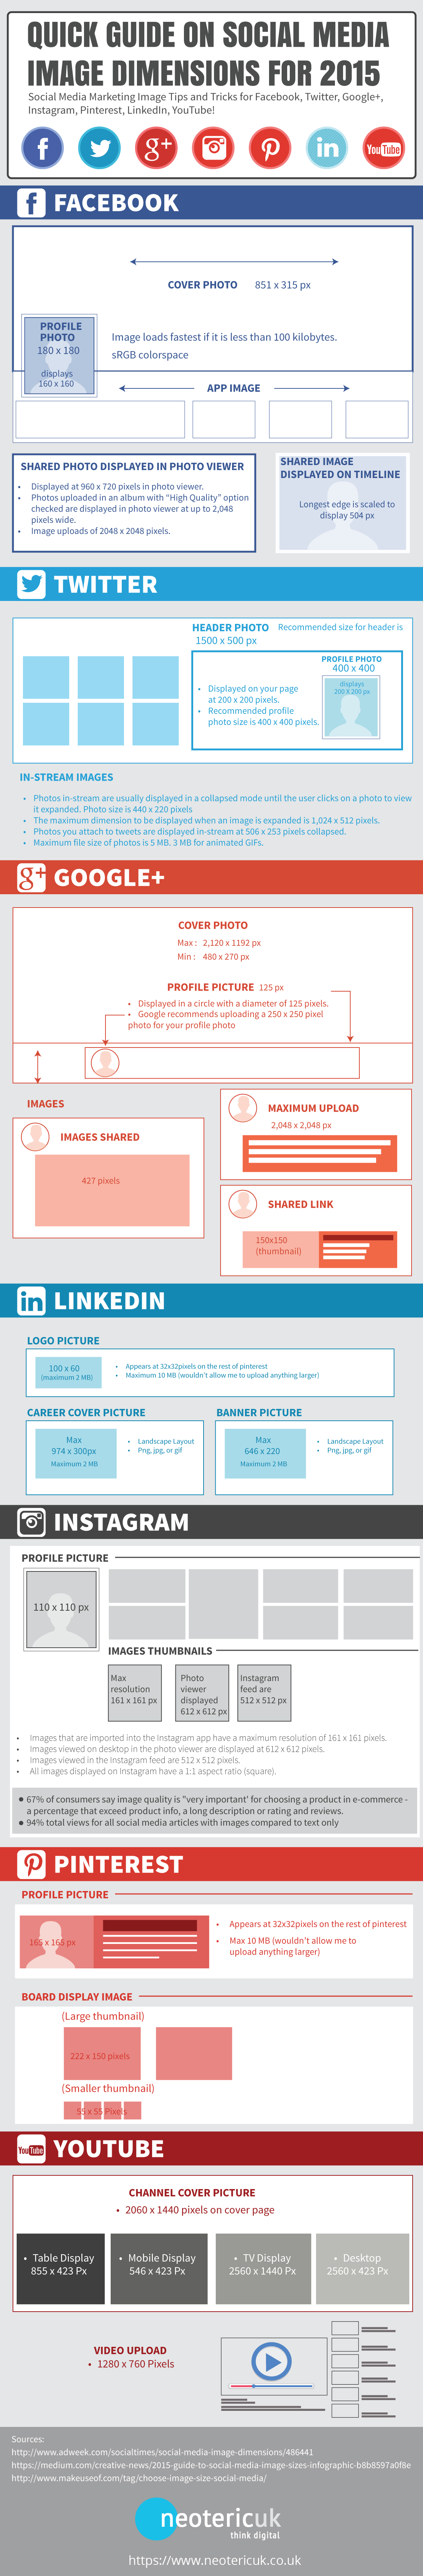 Quick Guide on Social Media Image Dimensions for 2015